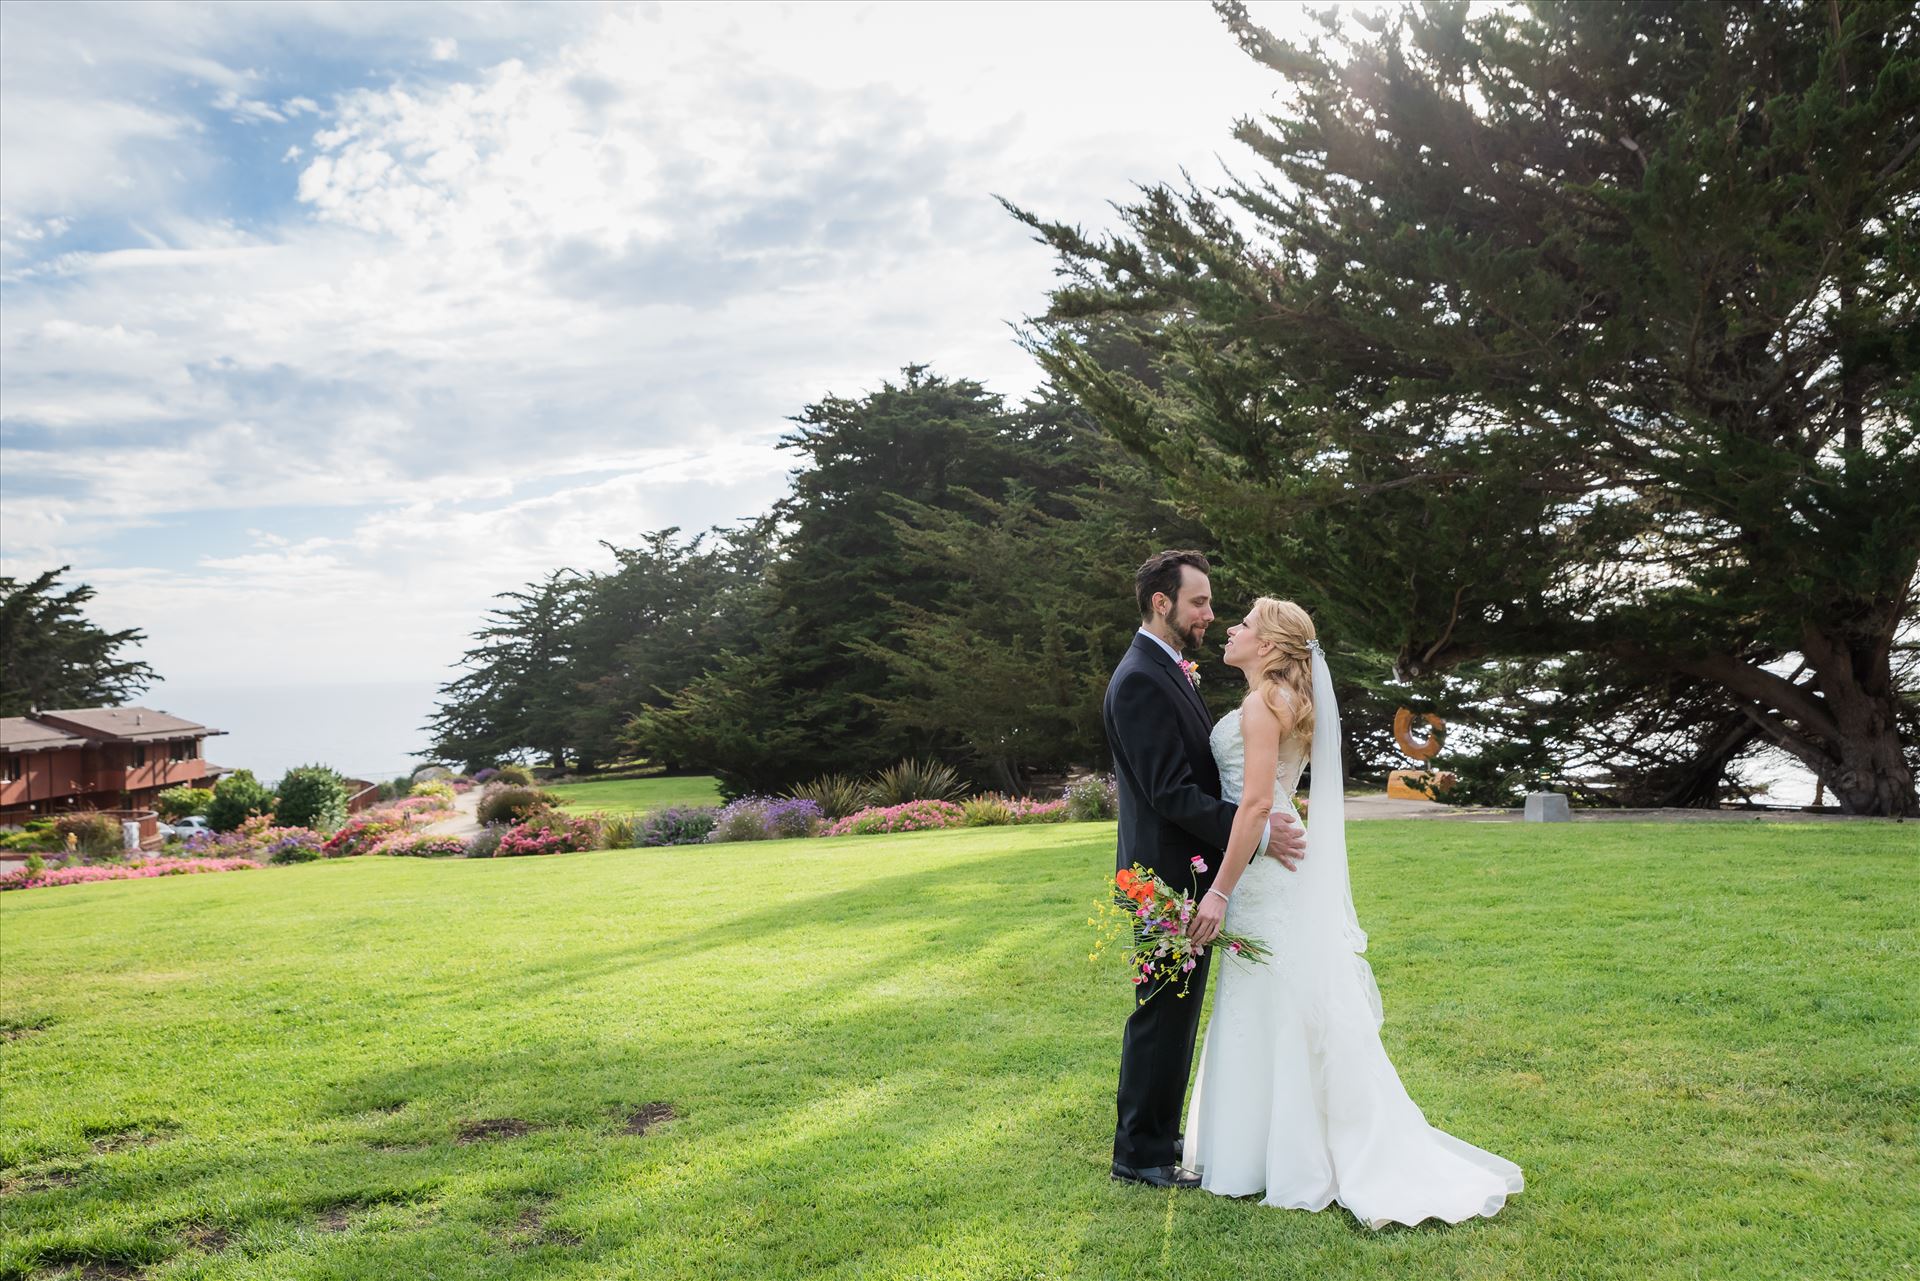 DSC_8405.JPG Intimate wedding at Ragged Point Inn in Ragged Point, California near Big Sur, wedding photography by Mirror's Edge Photography. by Sarah Williams